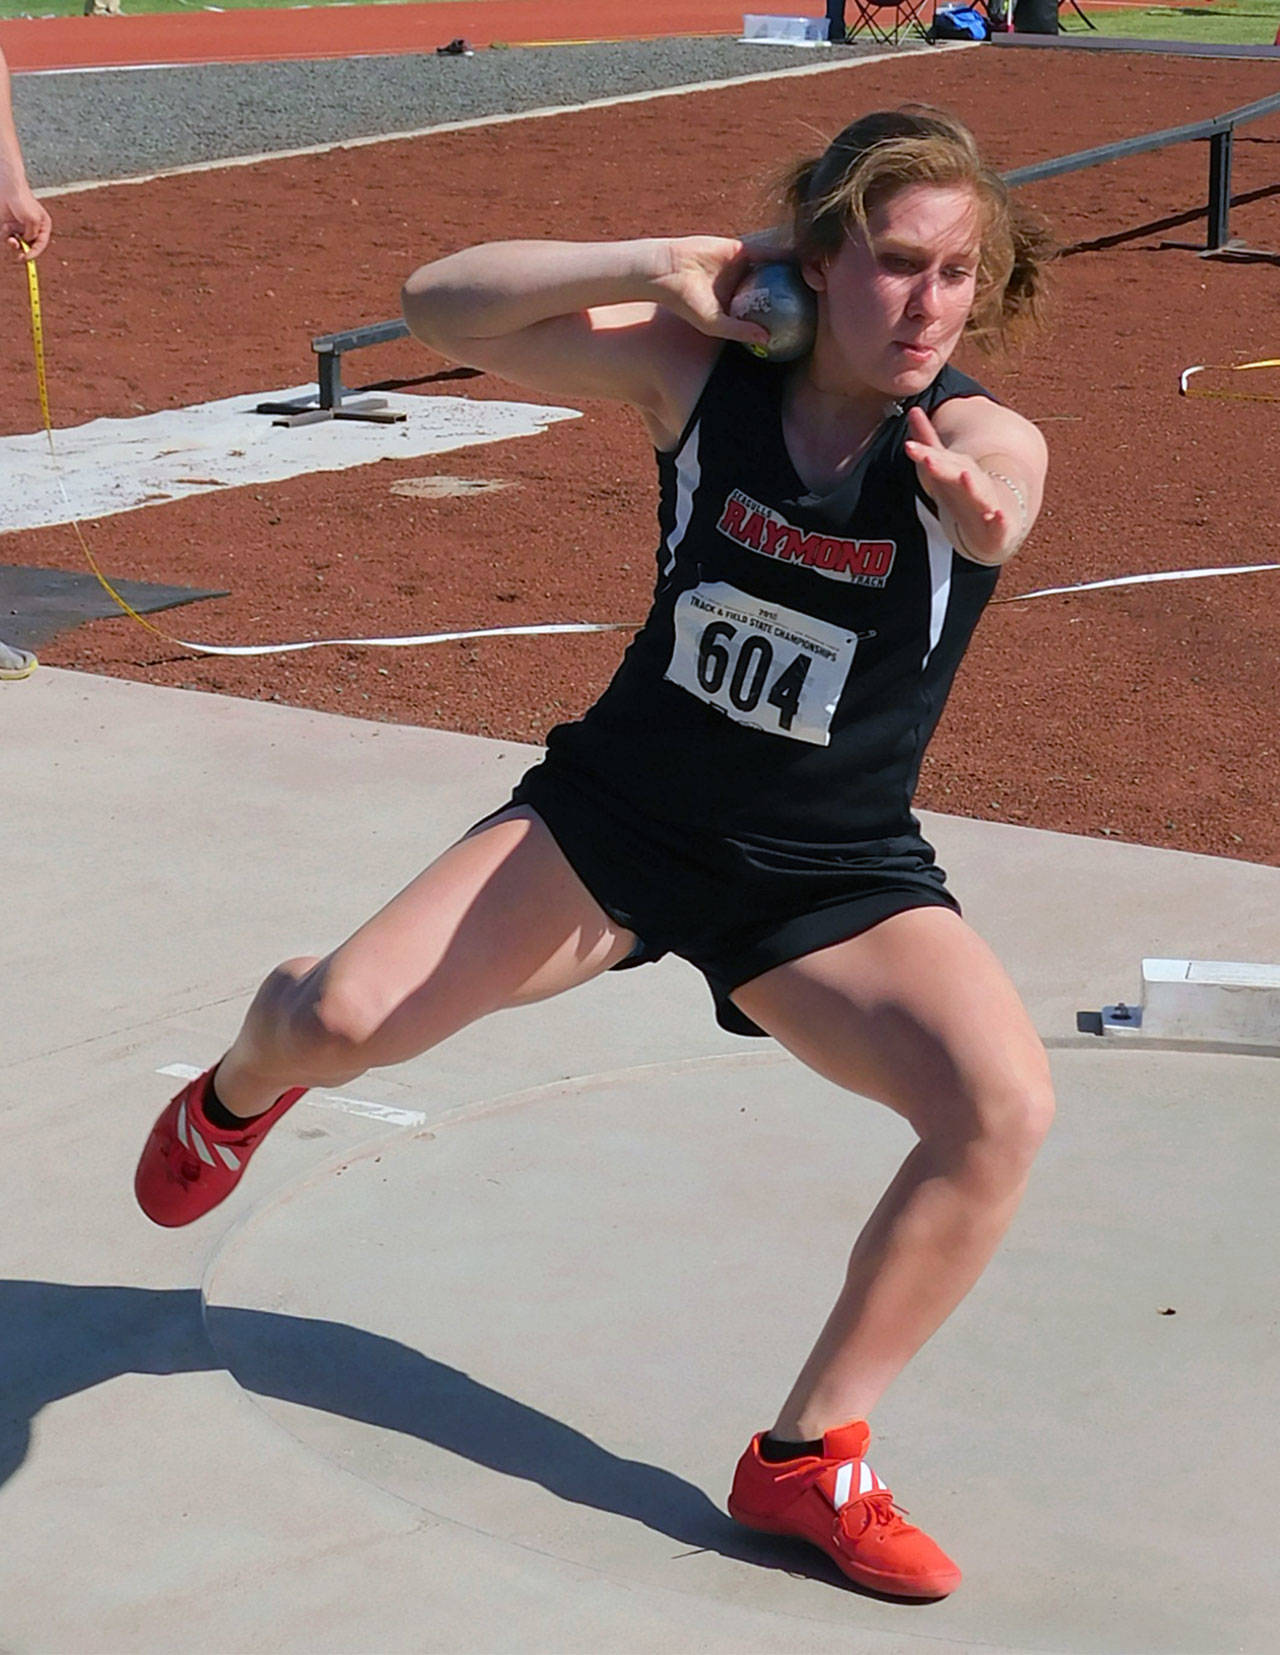 Former Raymond athlete Karlee Freeman capped off her stellar prep career by winning all three throwing events at the 2B State Meet in May. After graduating, the USC-bound Freeman won a Junior Olympic National Championship in the discus over the summer. (Photo by Shayn Sath)